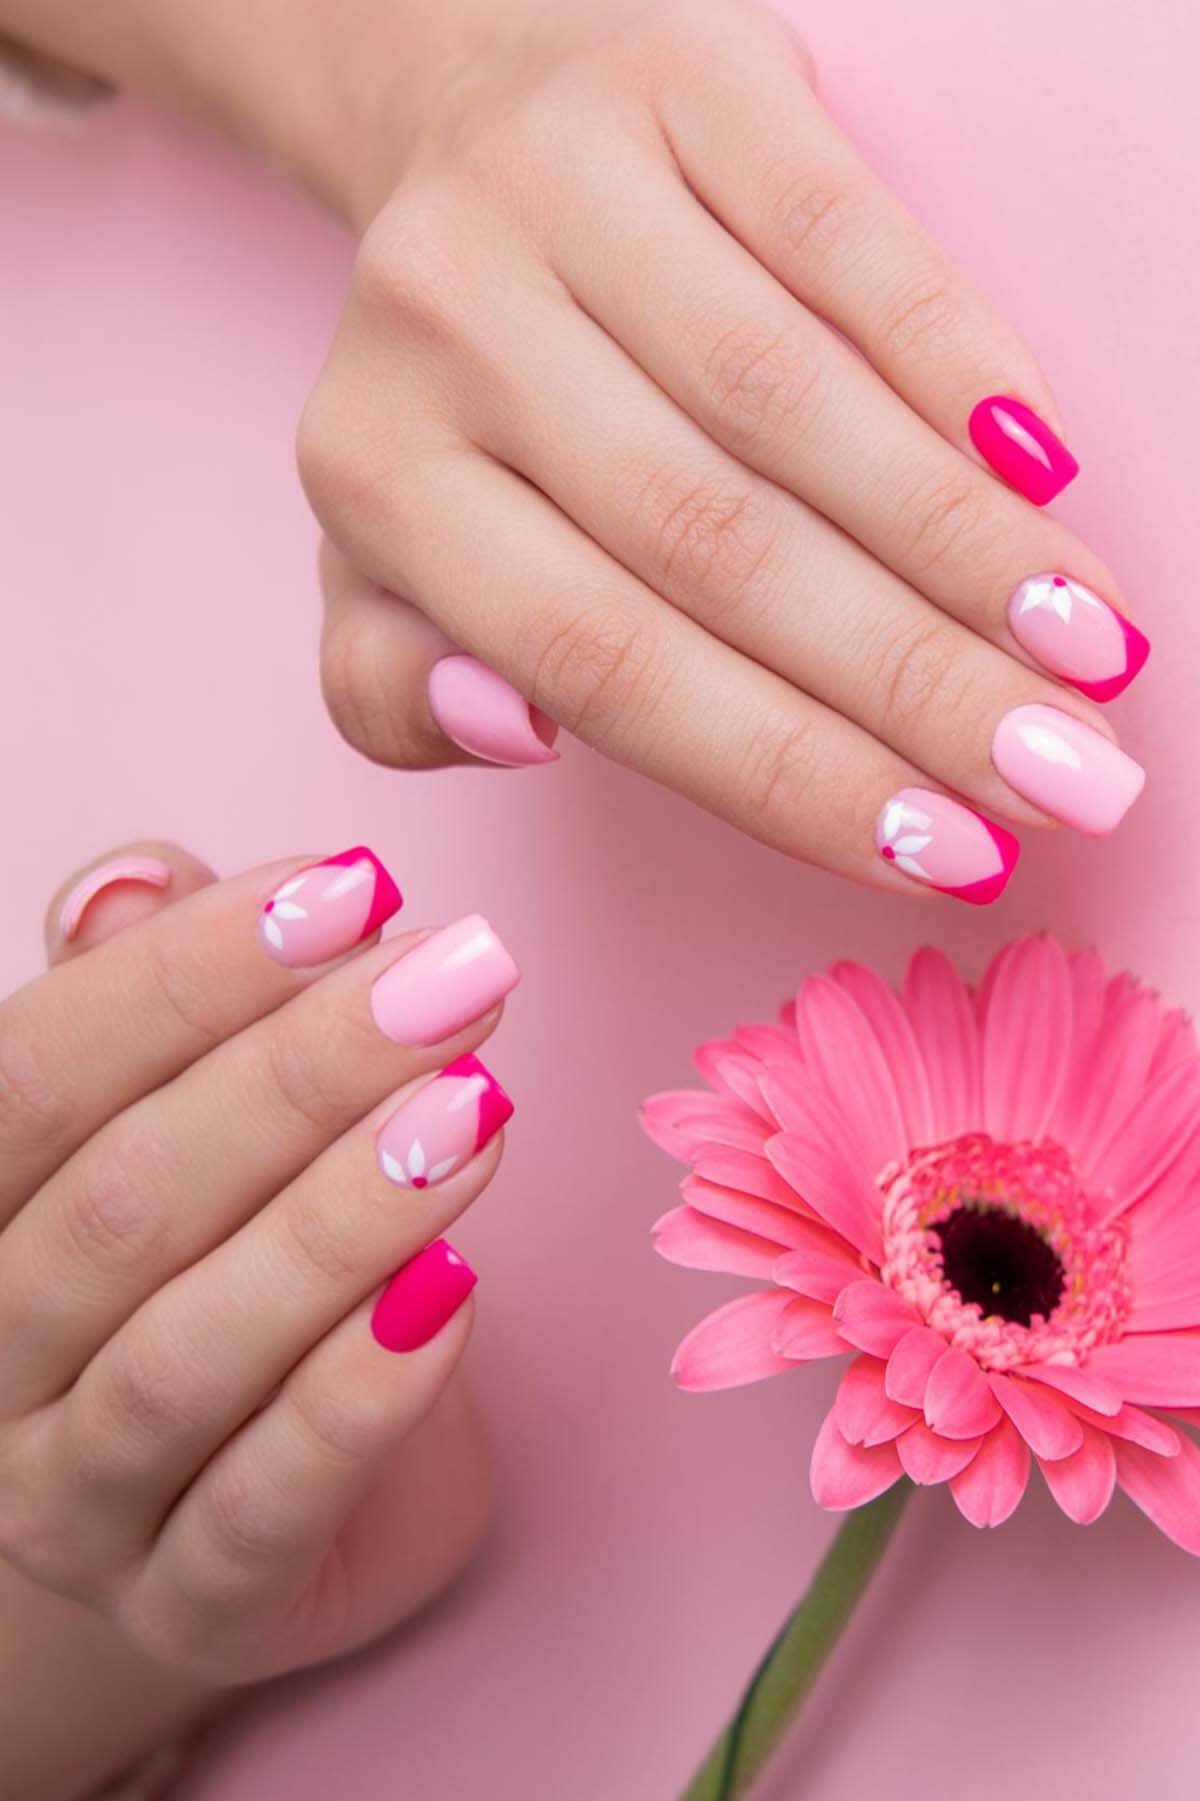 Pink and white floral design